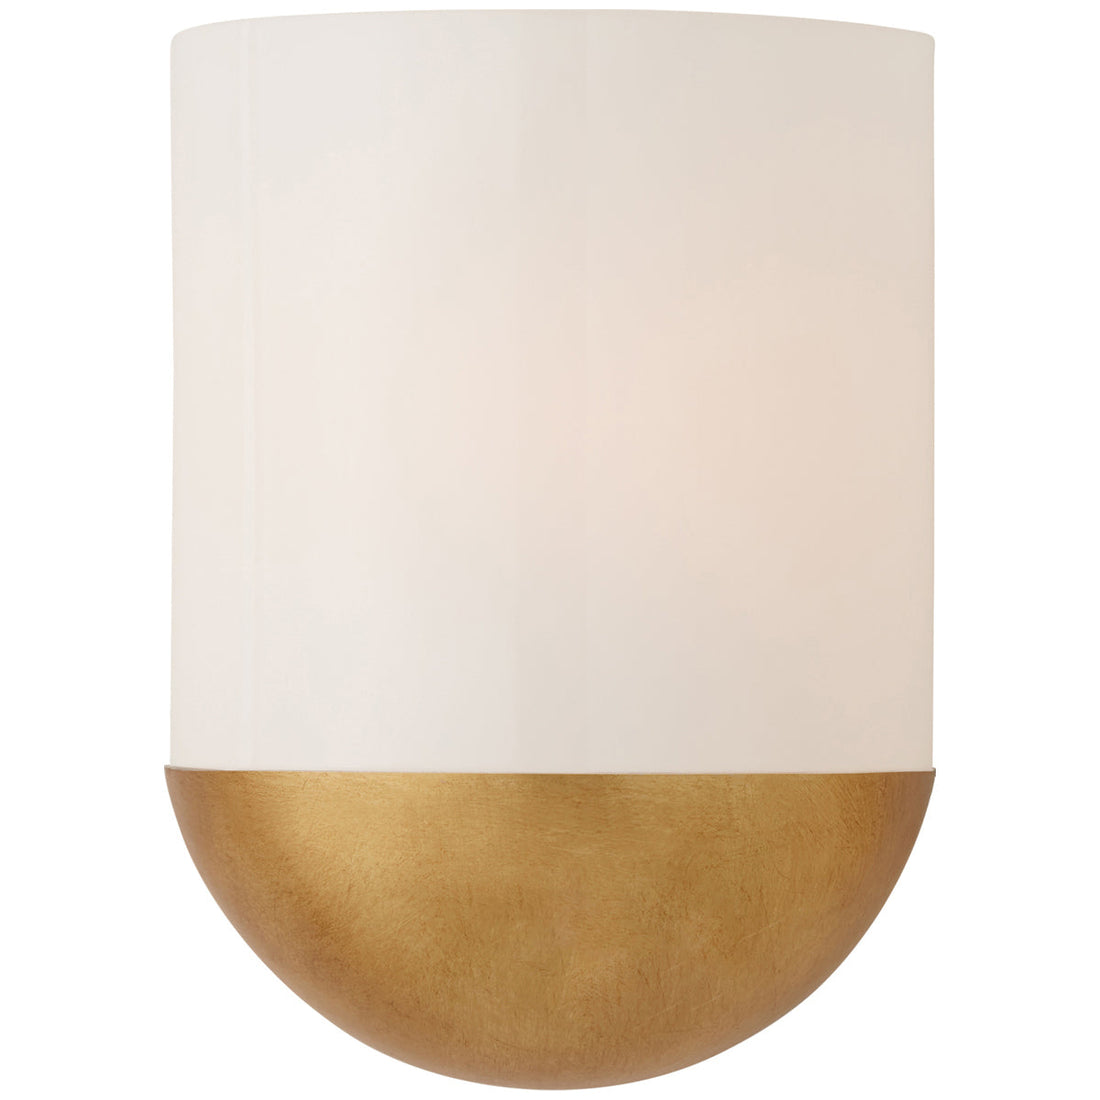 Visual Comfort Crescent Small Sconce